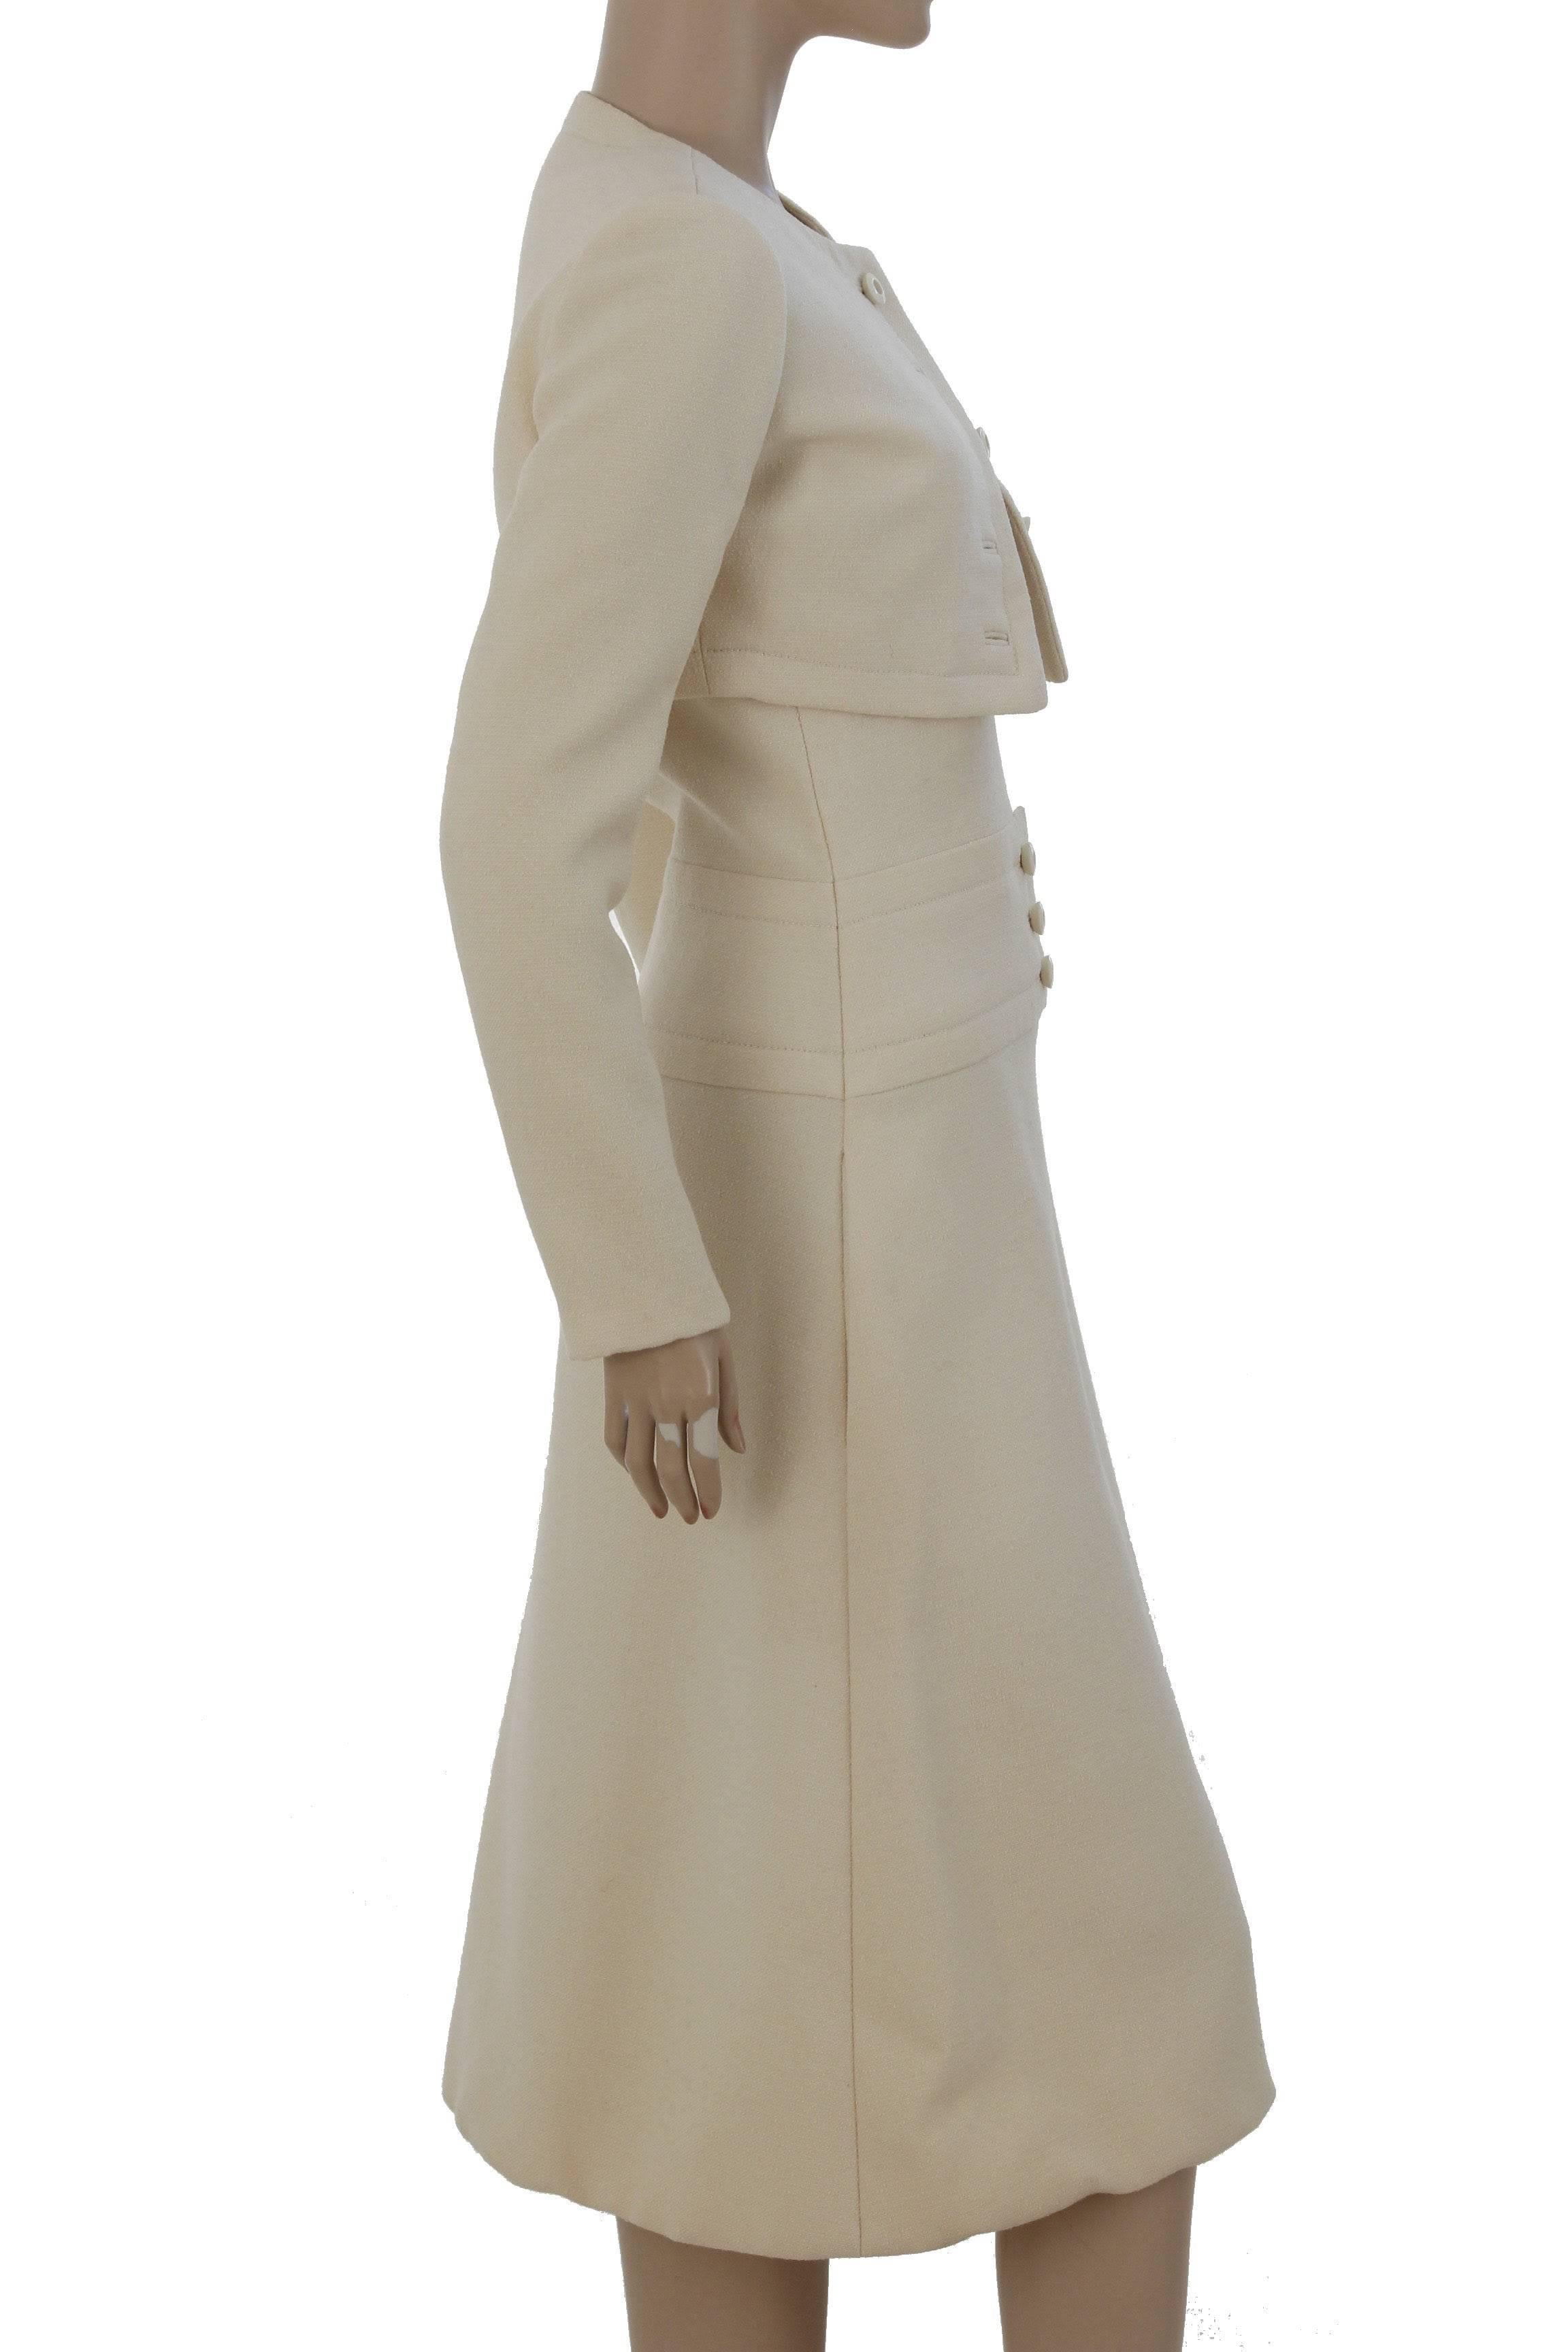 Beige Ultra Rare Galanos Cream Wool Dress with Cropped Jacket Ensemble 2pc Set 60s S